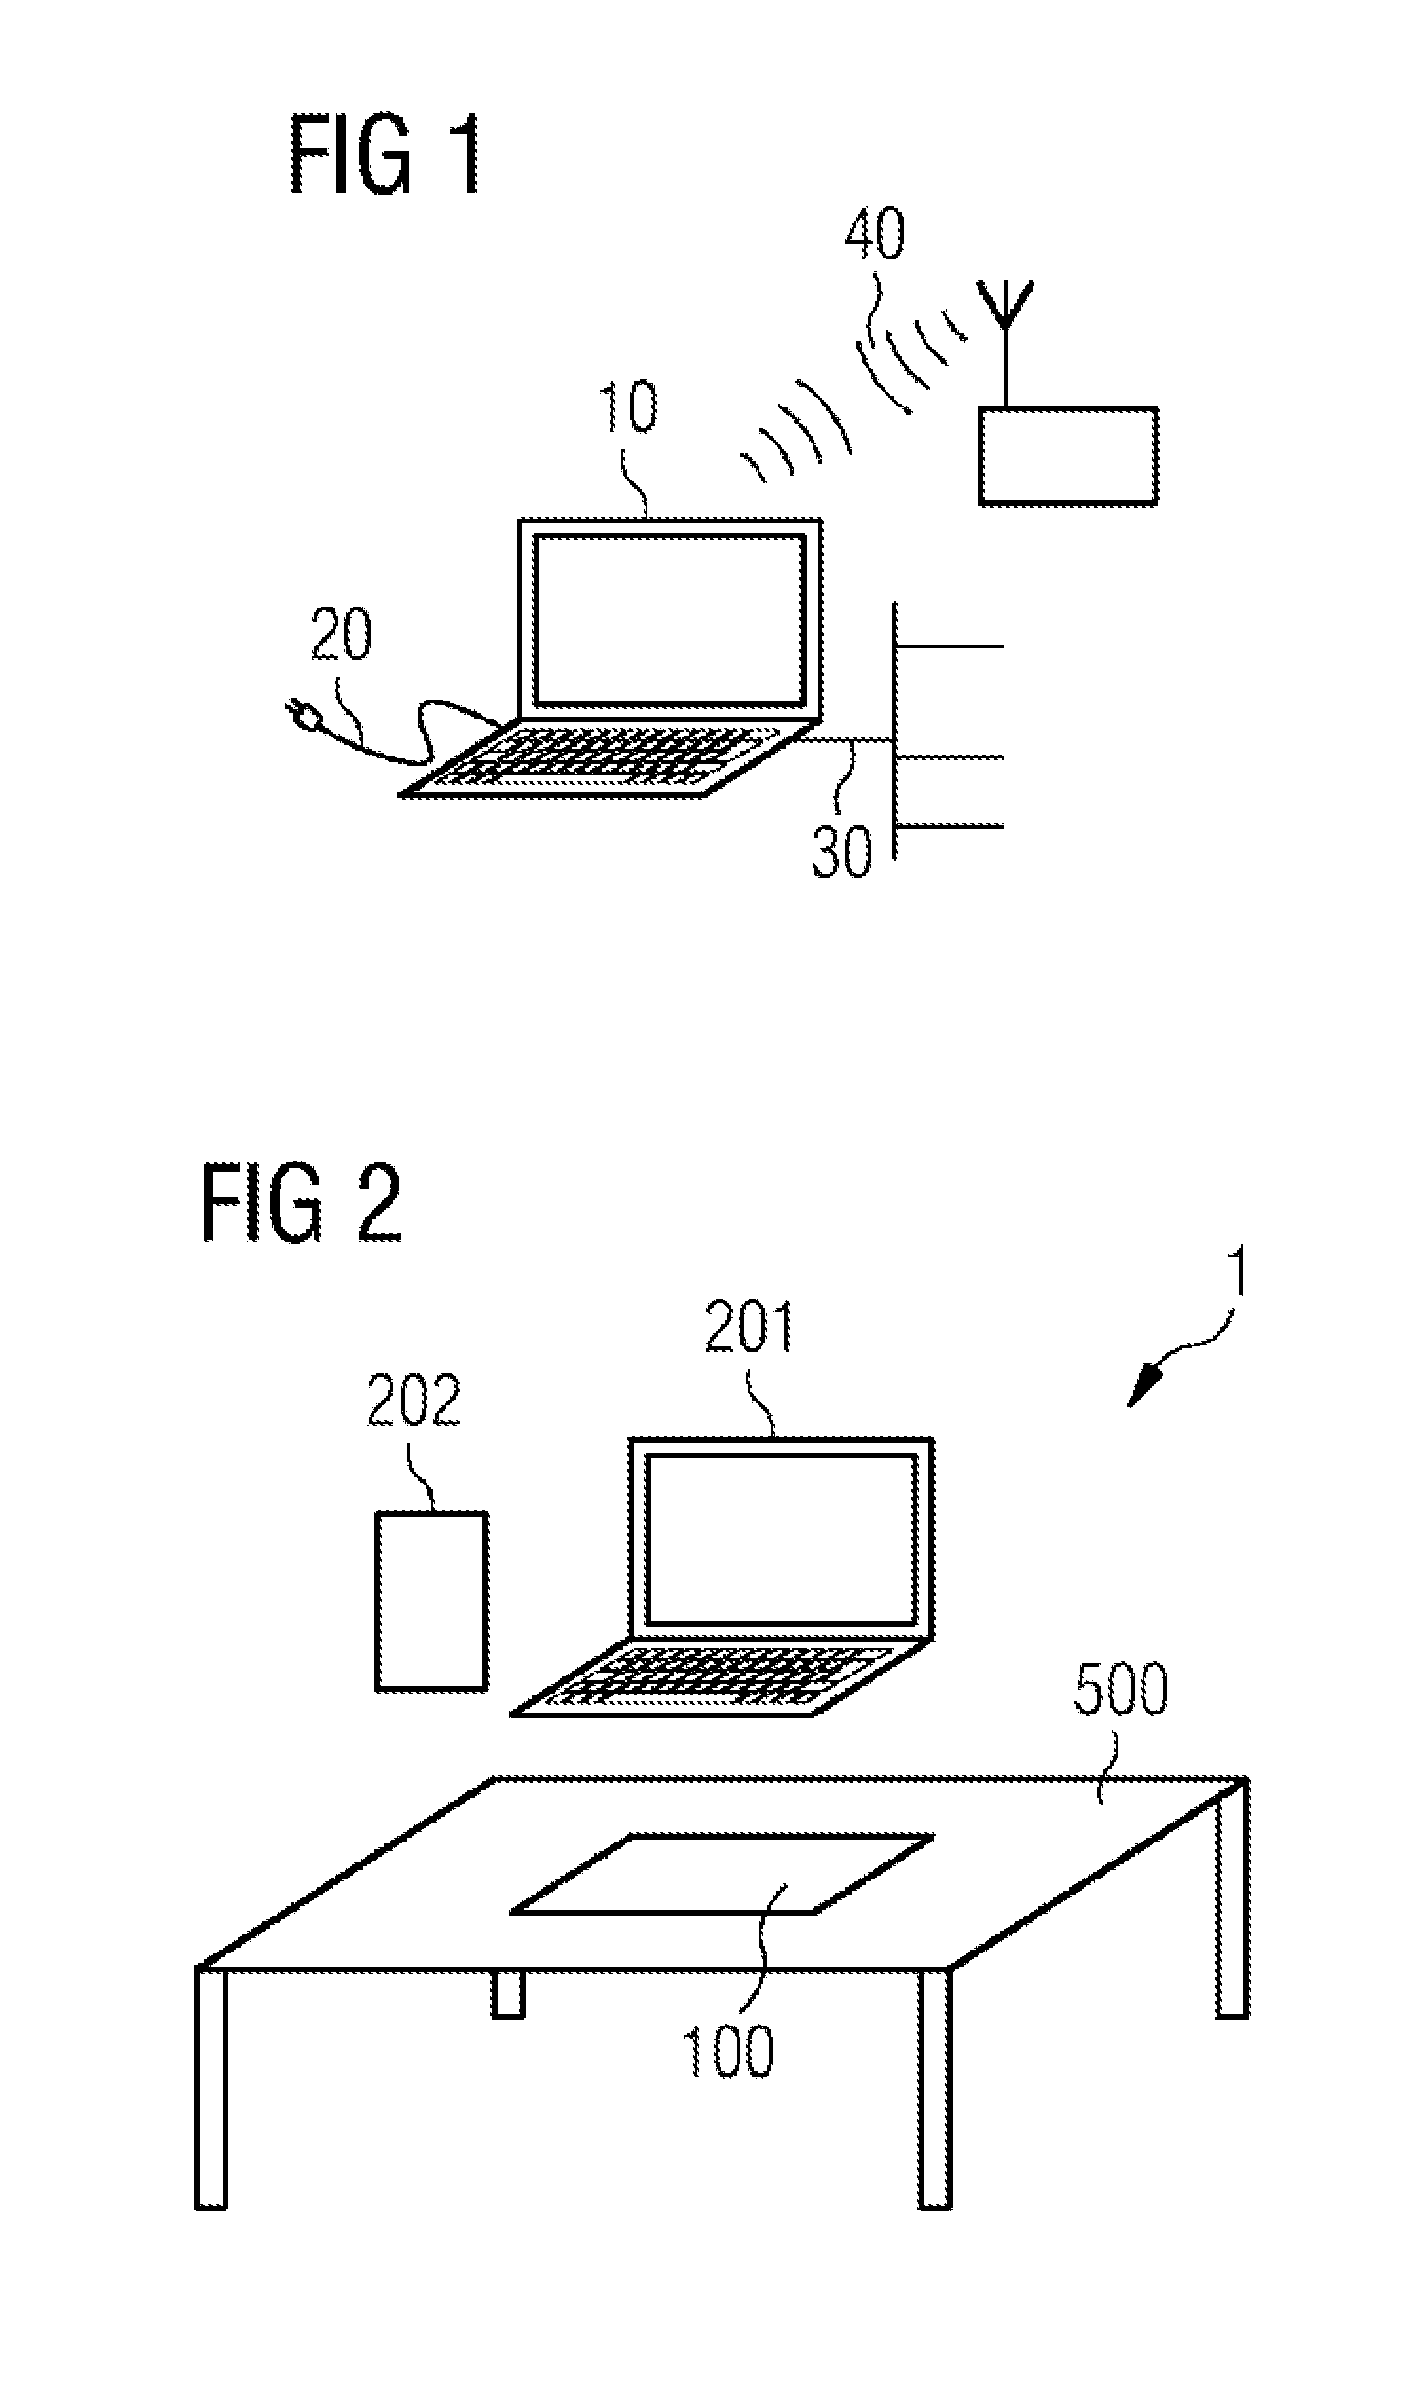 Docking station for a wireless energy and data connection